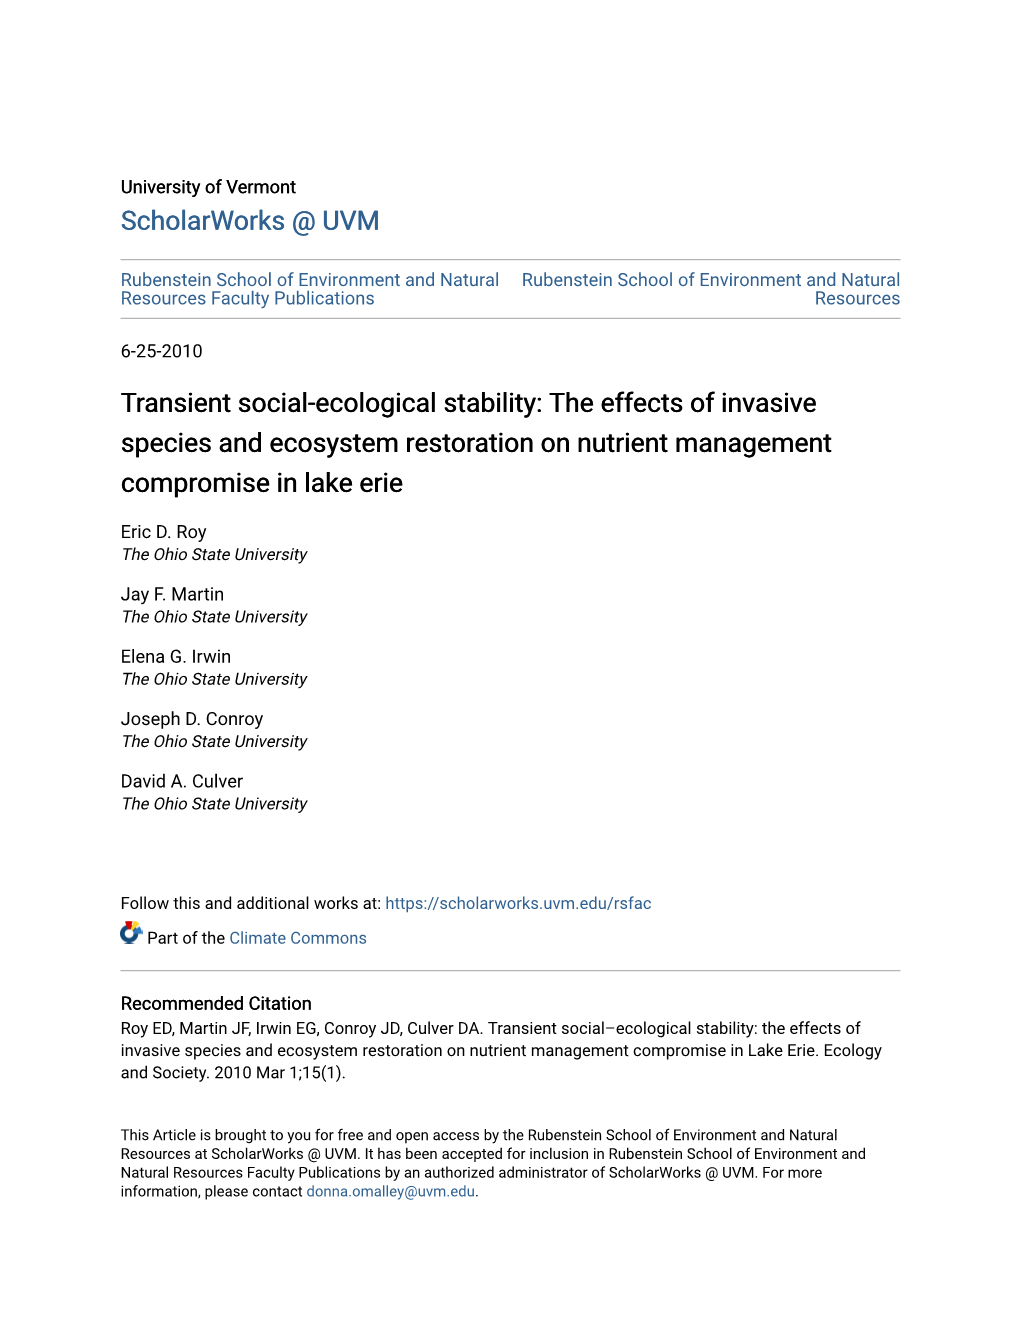 Transient Social-Ecological Stability: the Effects of Invasive Species and Ecosystem Restoration on Nutrient Management Compromise in Lake Erie